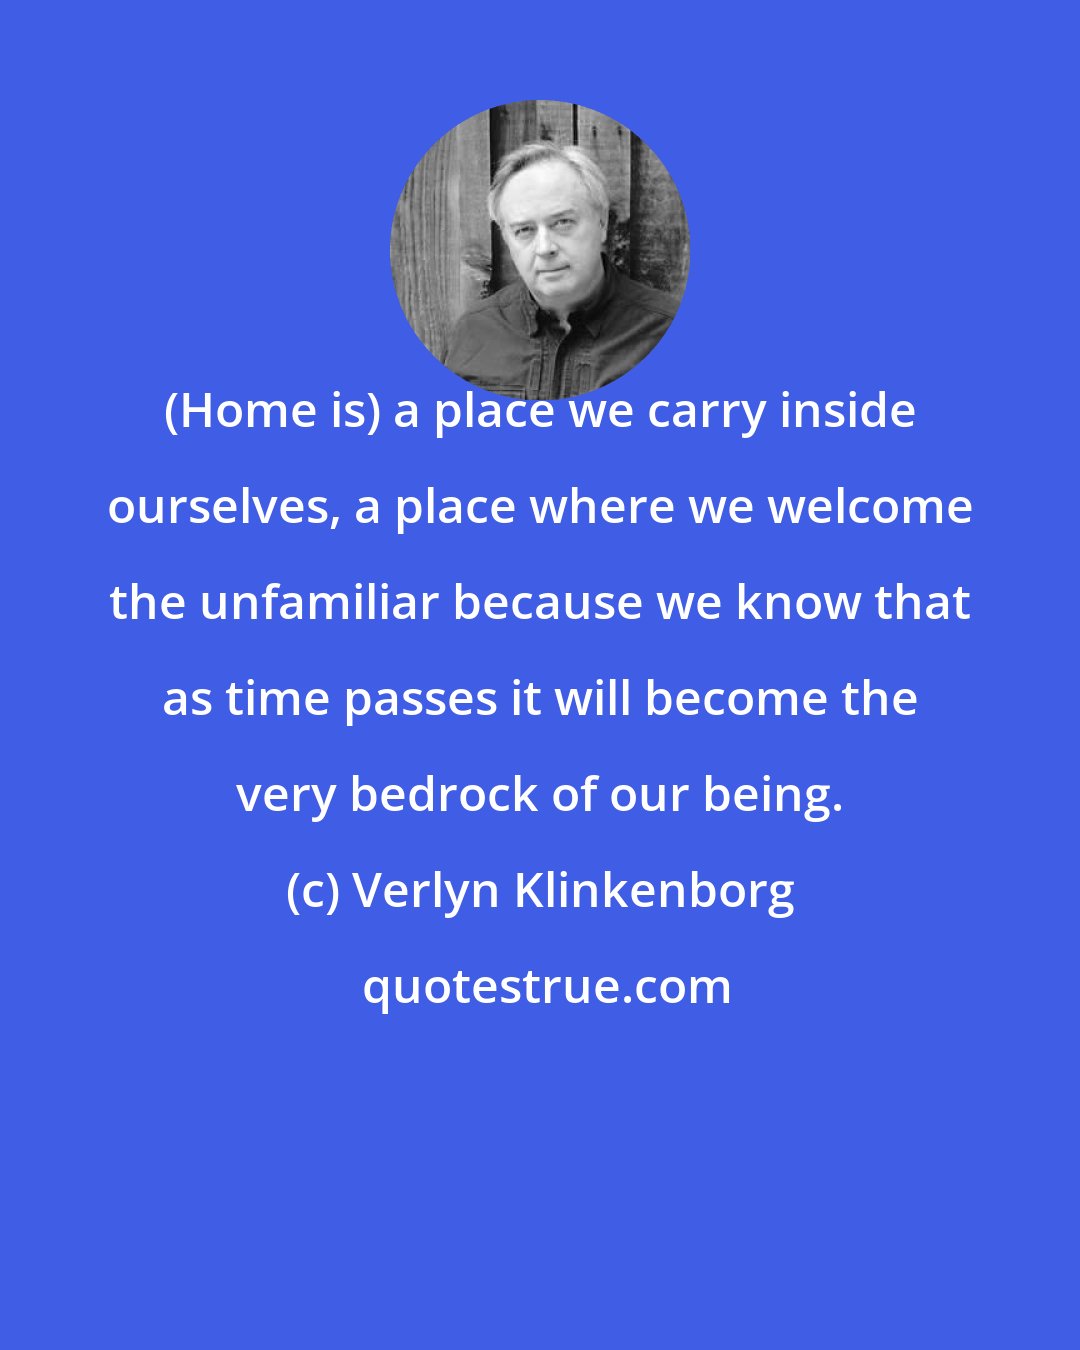 Verlyn Klinkenborg: (Home is) a place we carry inside ourselves, a place where we welcome the unfamiliar because we know that as time passes it will become the very bedrock of our being.